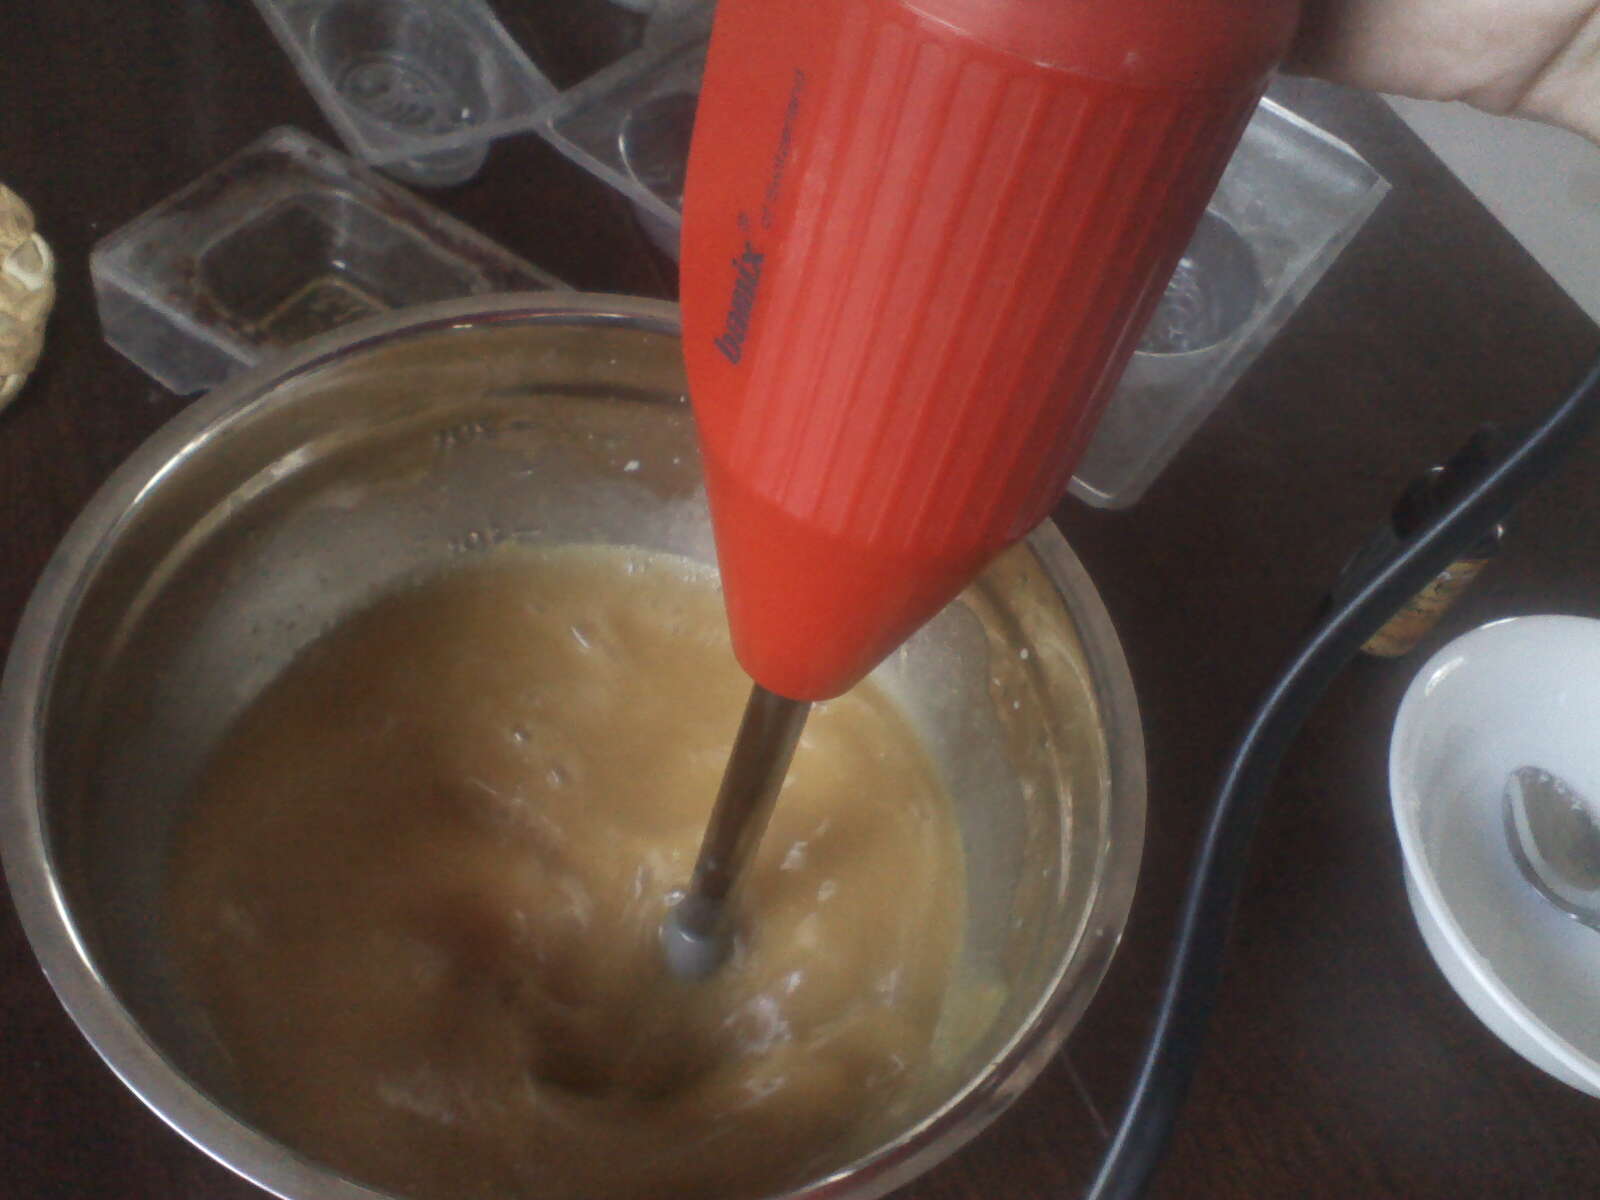 Image shows a large stock pot full of ingredients for homemade soap, with a stick blender immersed in the liquid, mixing it together.